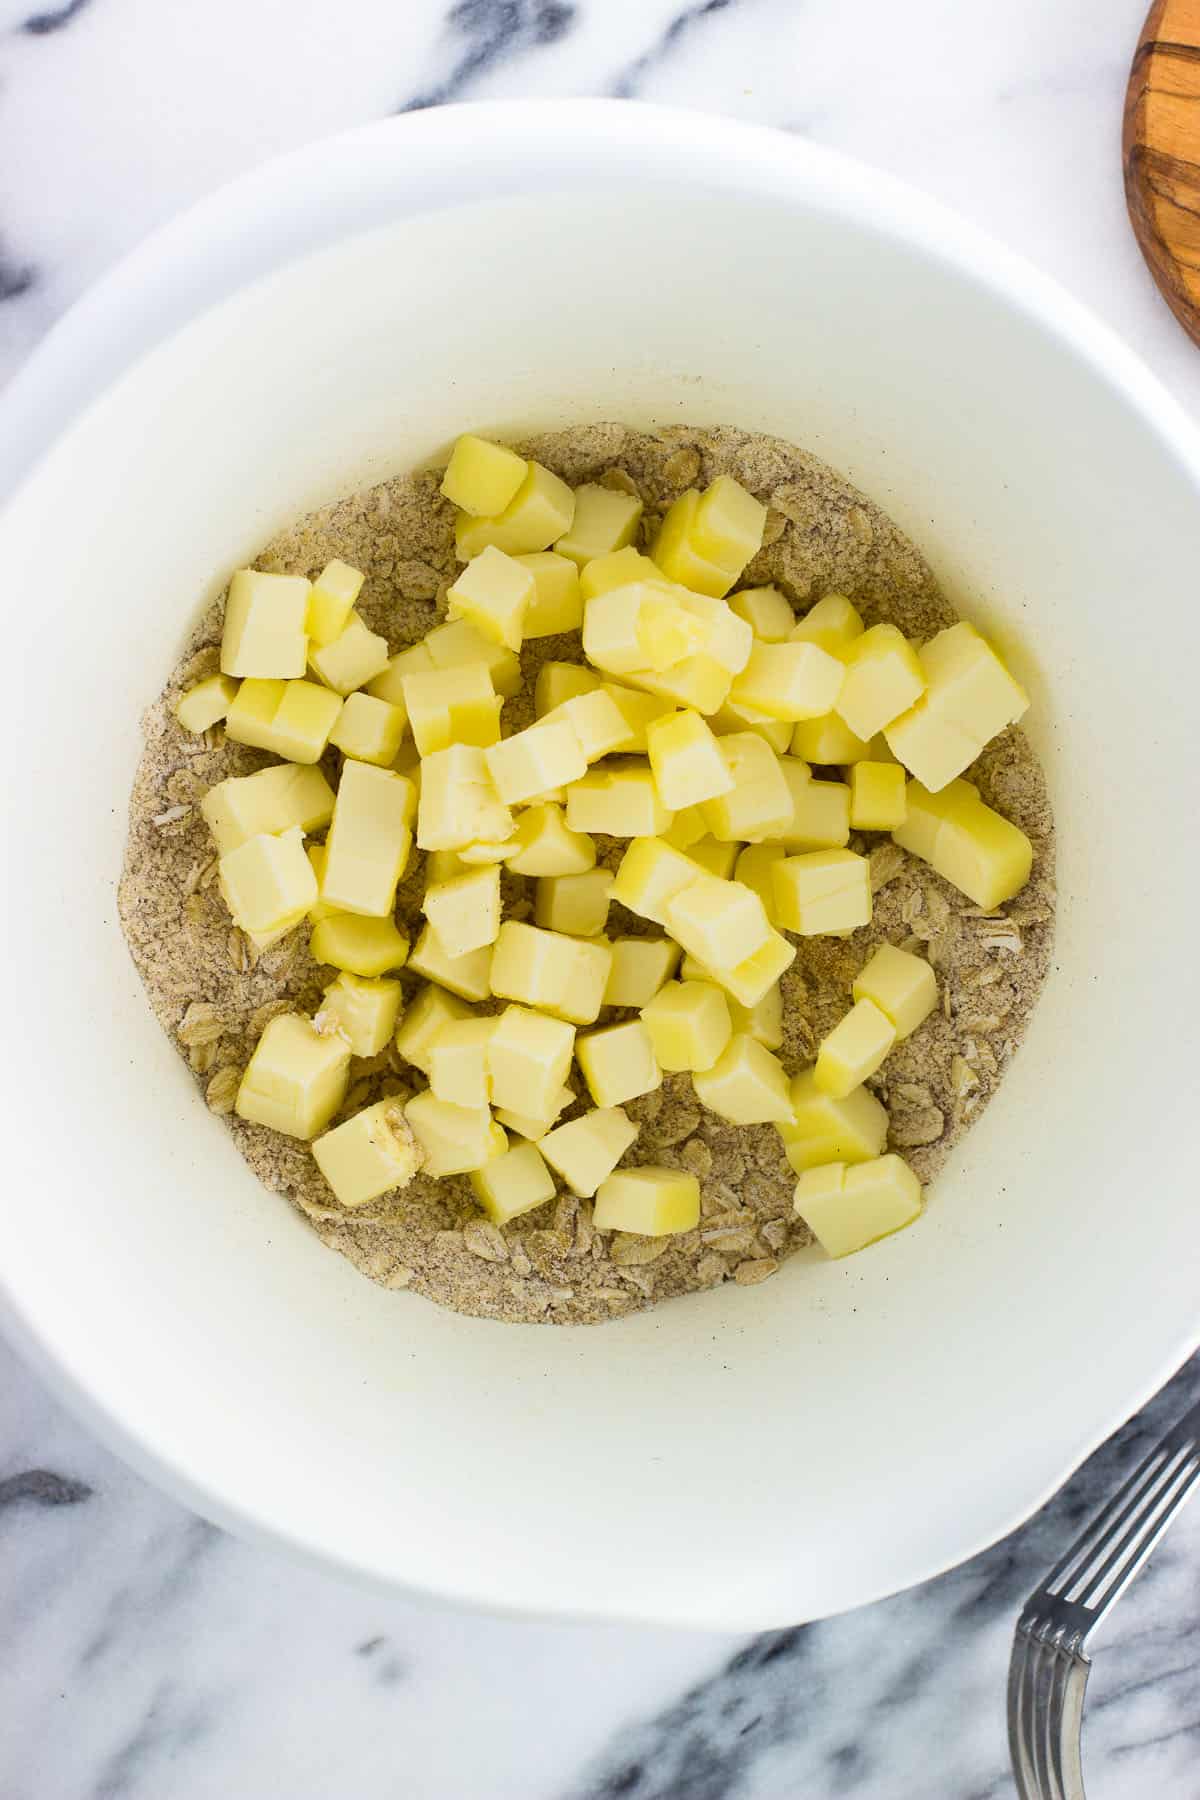 Cubed butter on top of the oat topping mixture in a bowl.